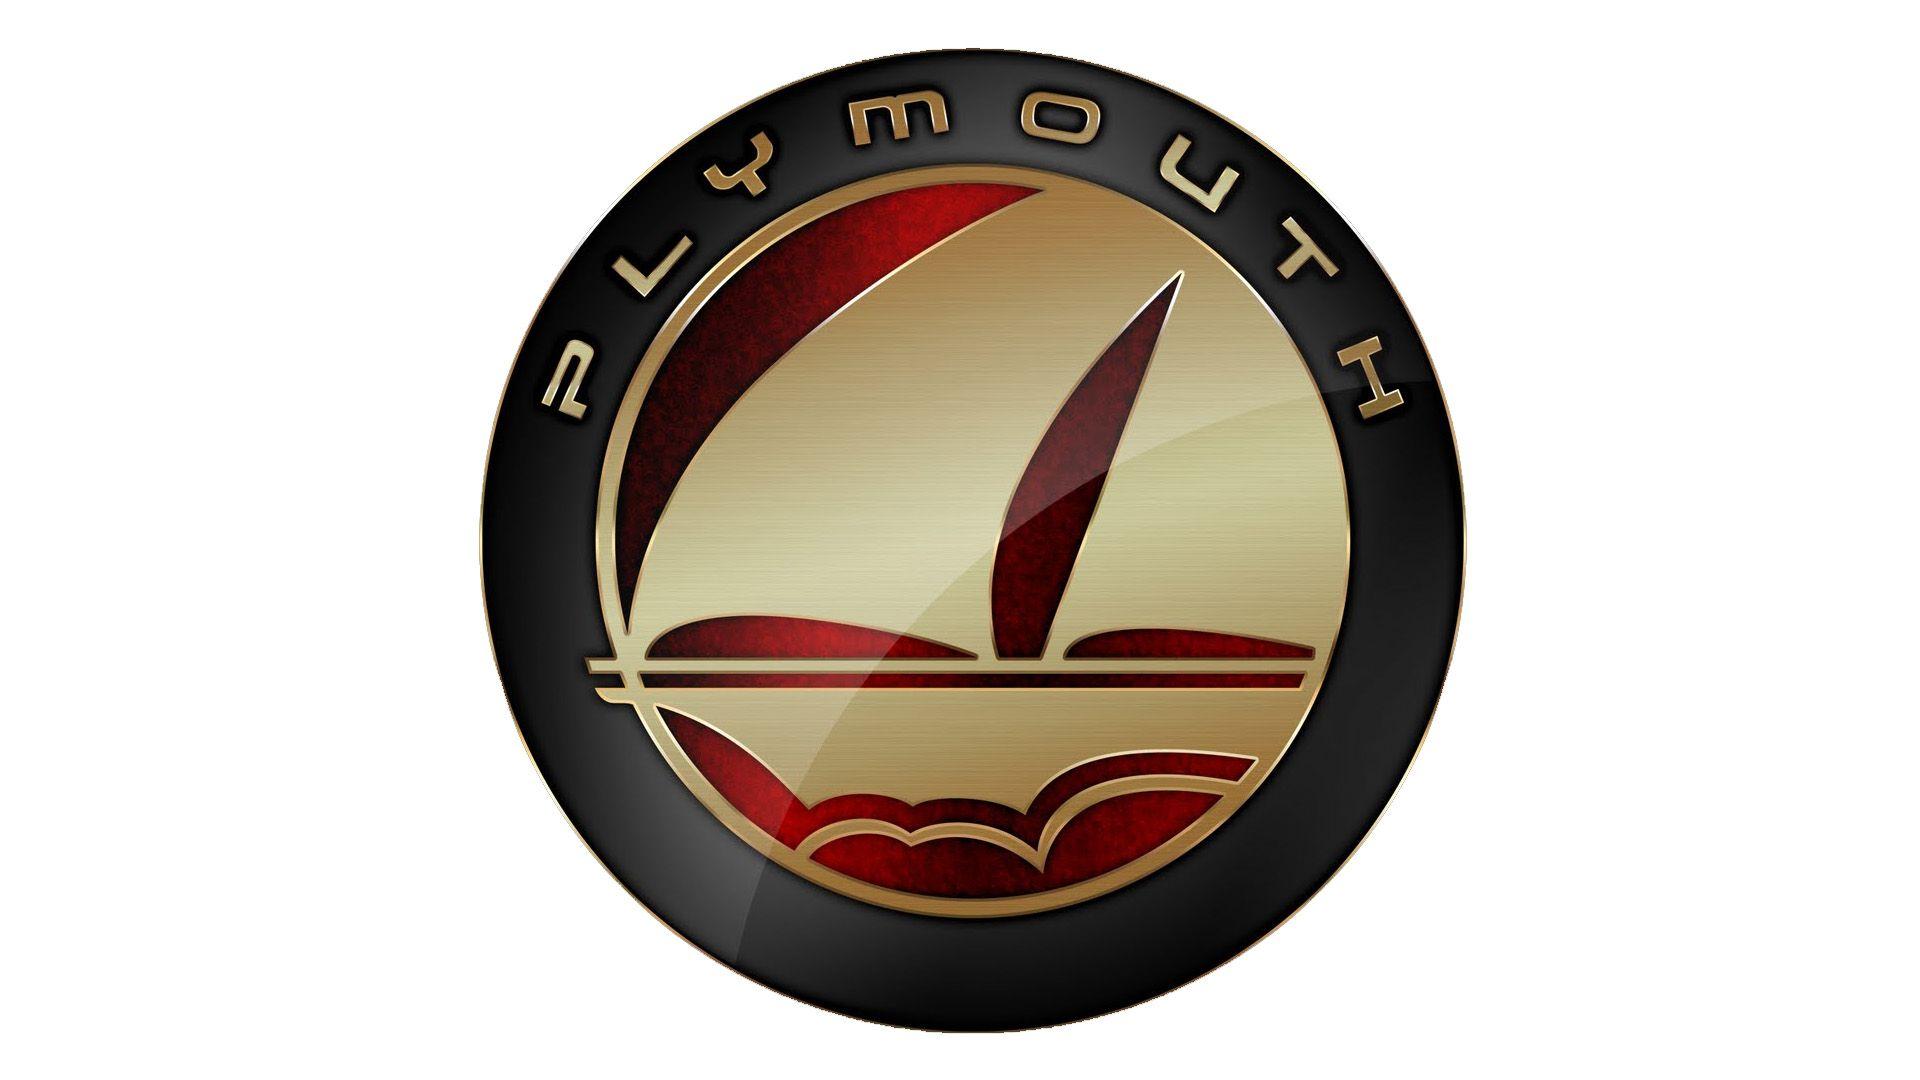 Plymouth Logo - Plymouth Logo Meaning and History, latest models | World Cars Brands